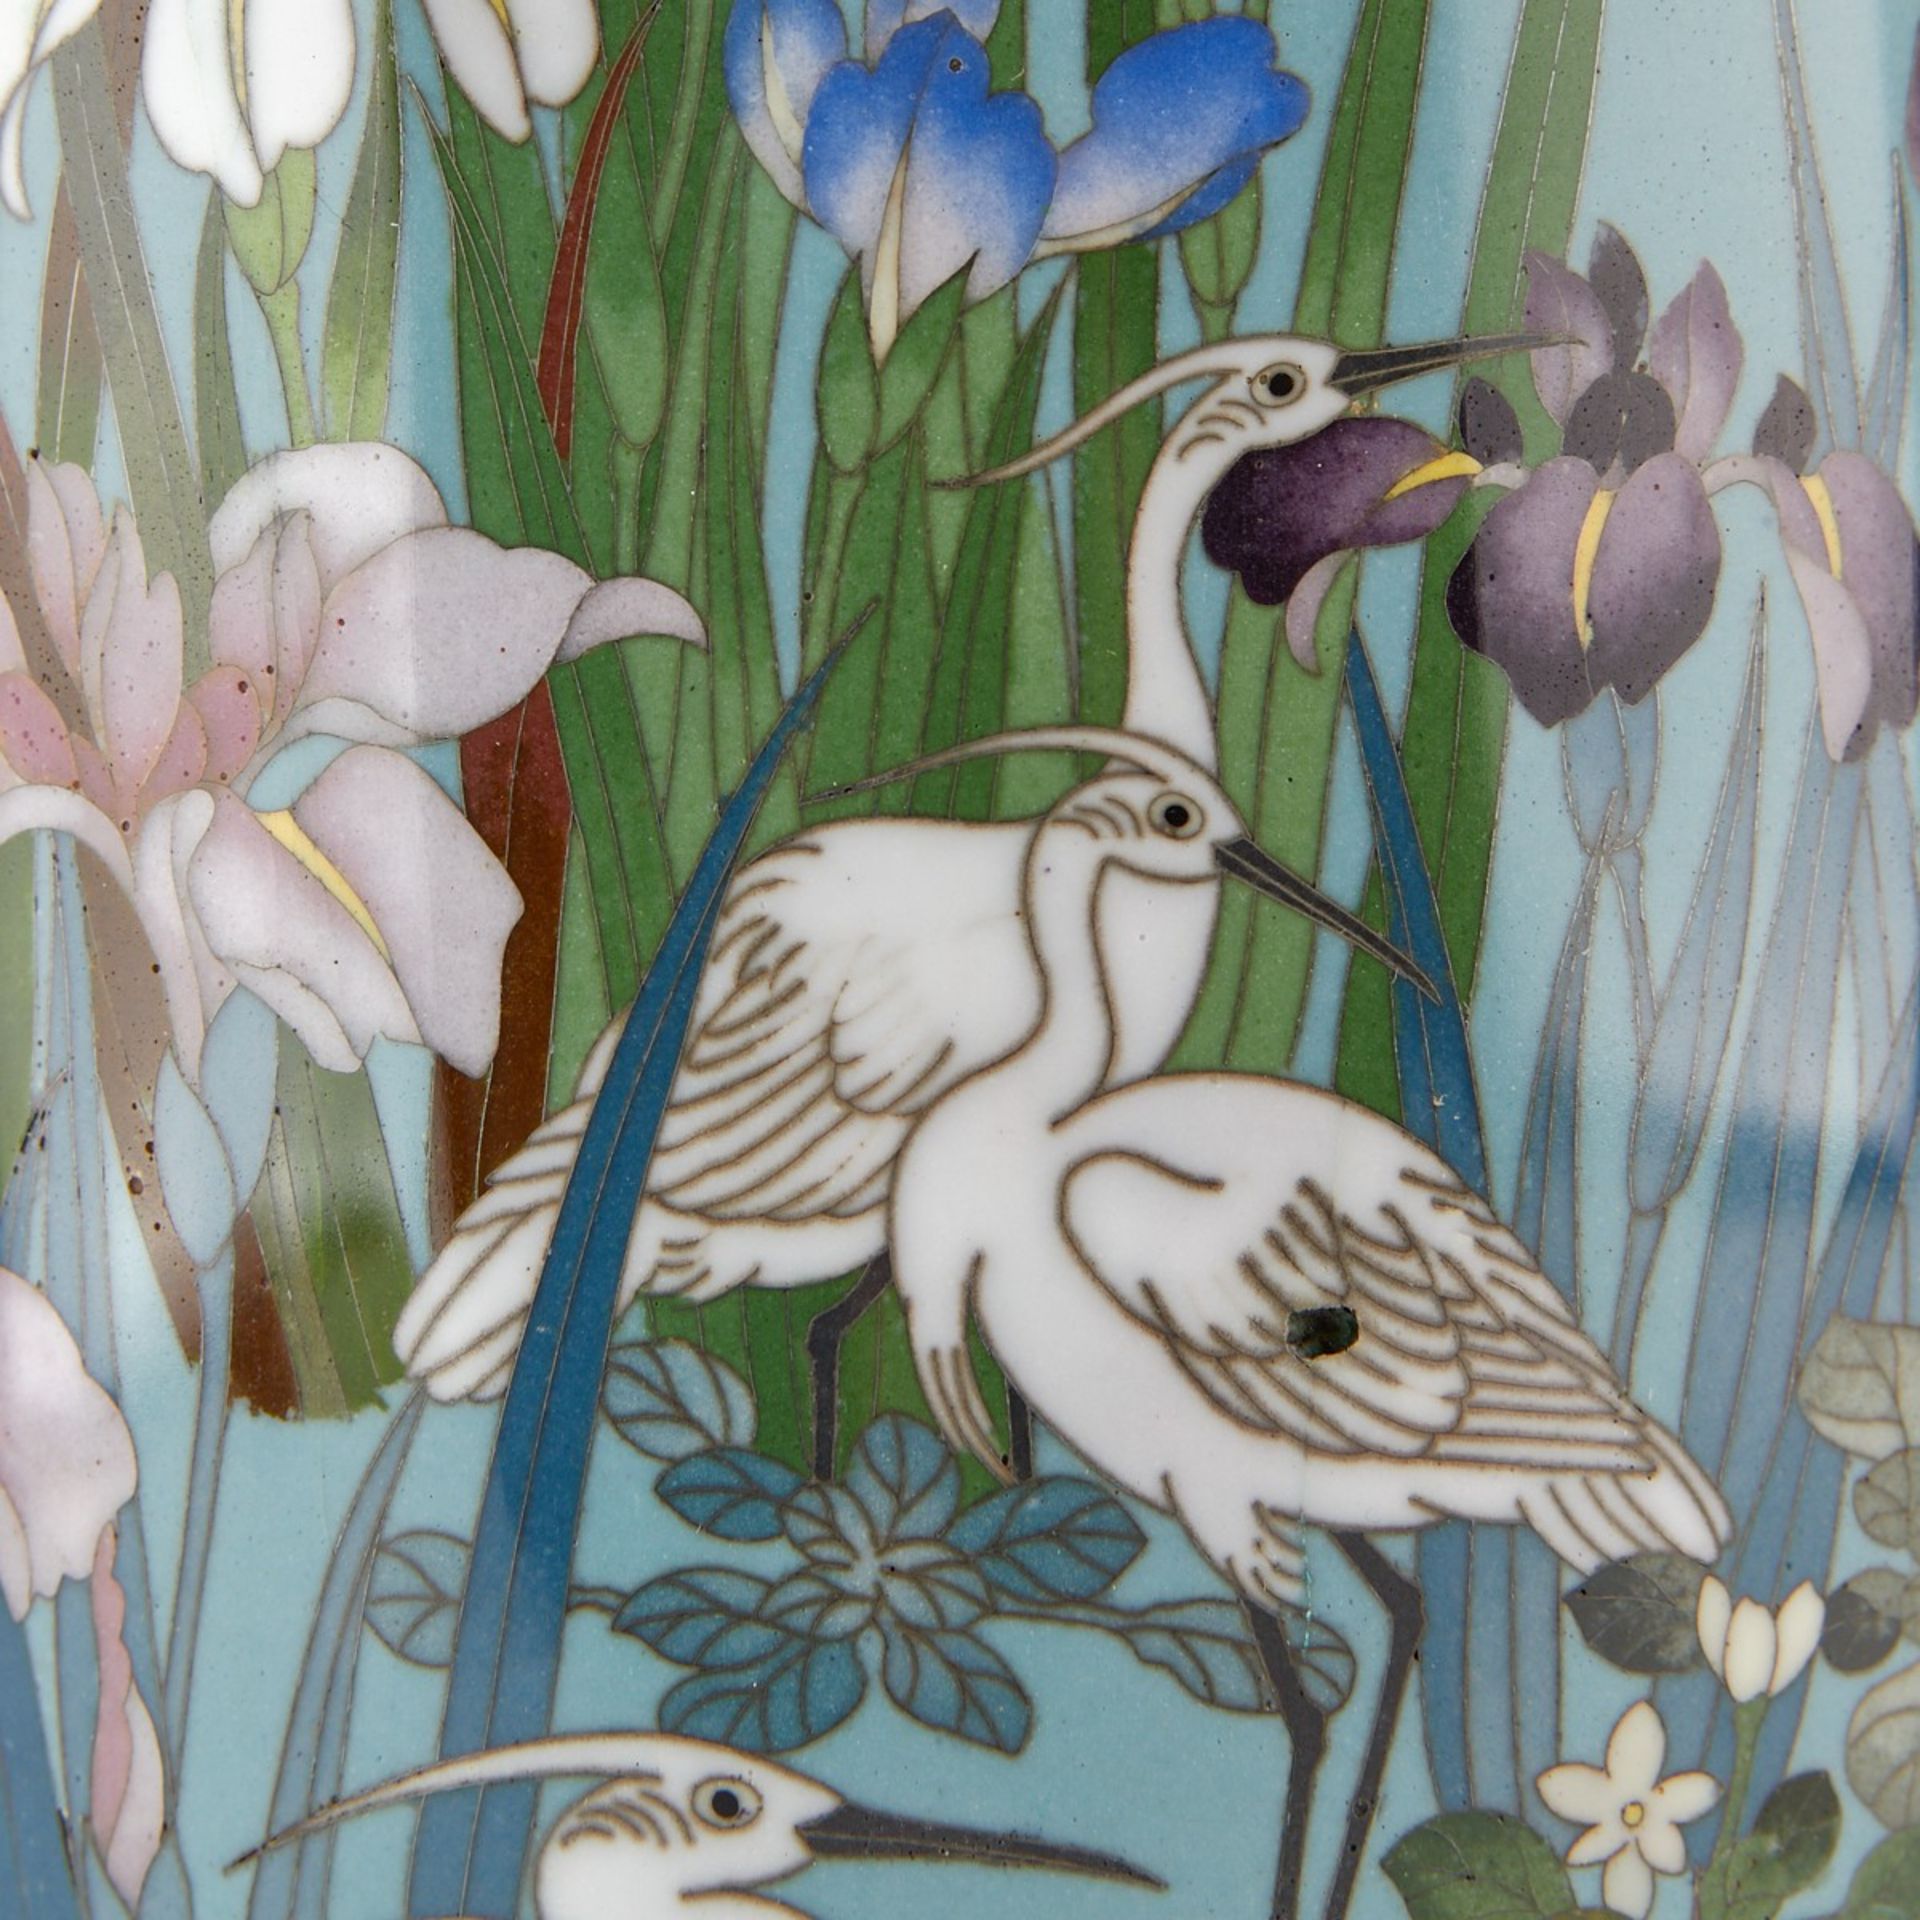 Japanese Cloisonne Vase Cranes and Flowers - Image 5 of 7